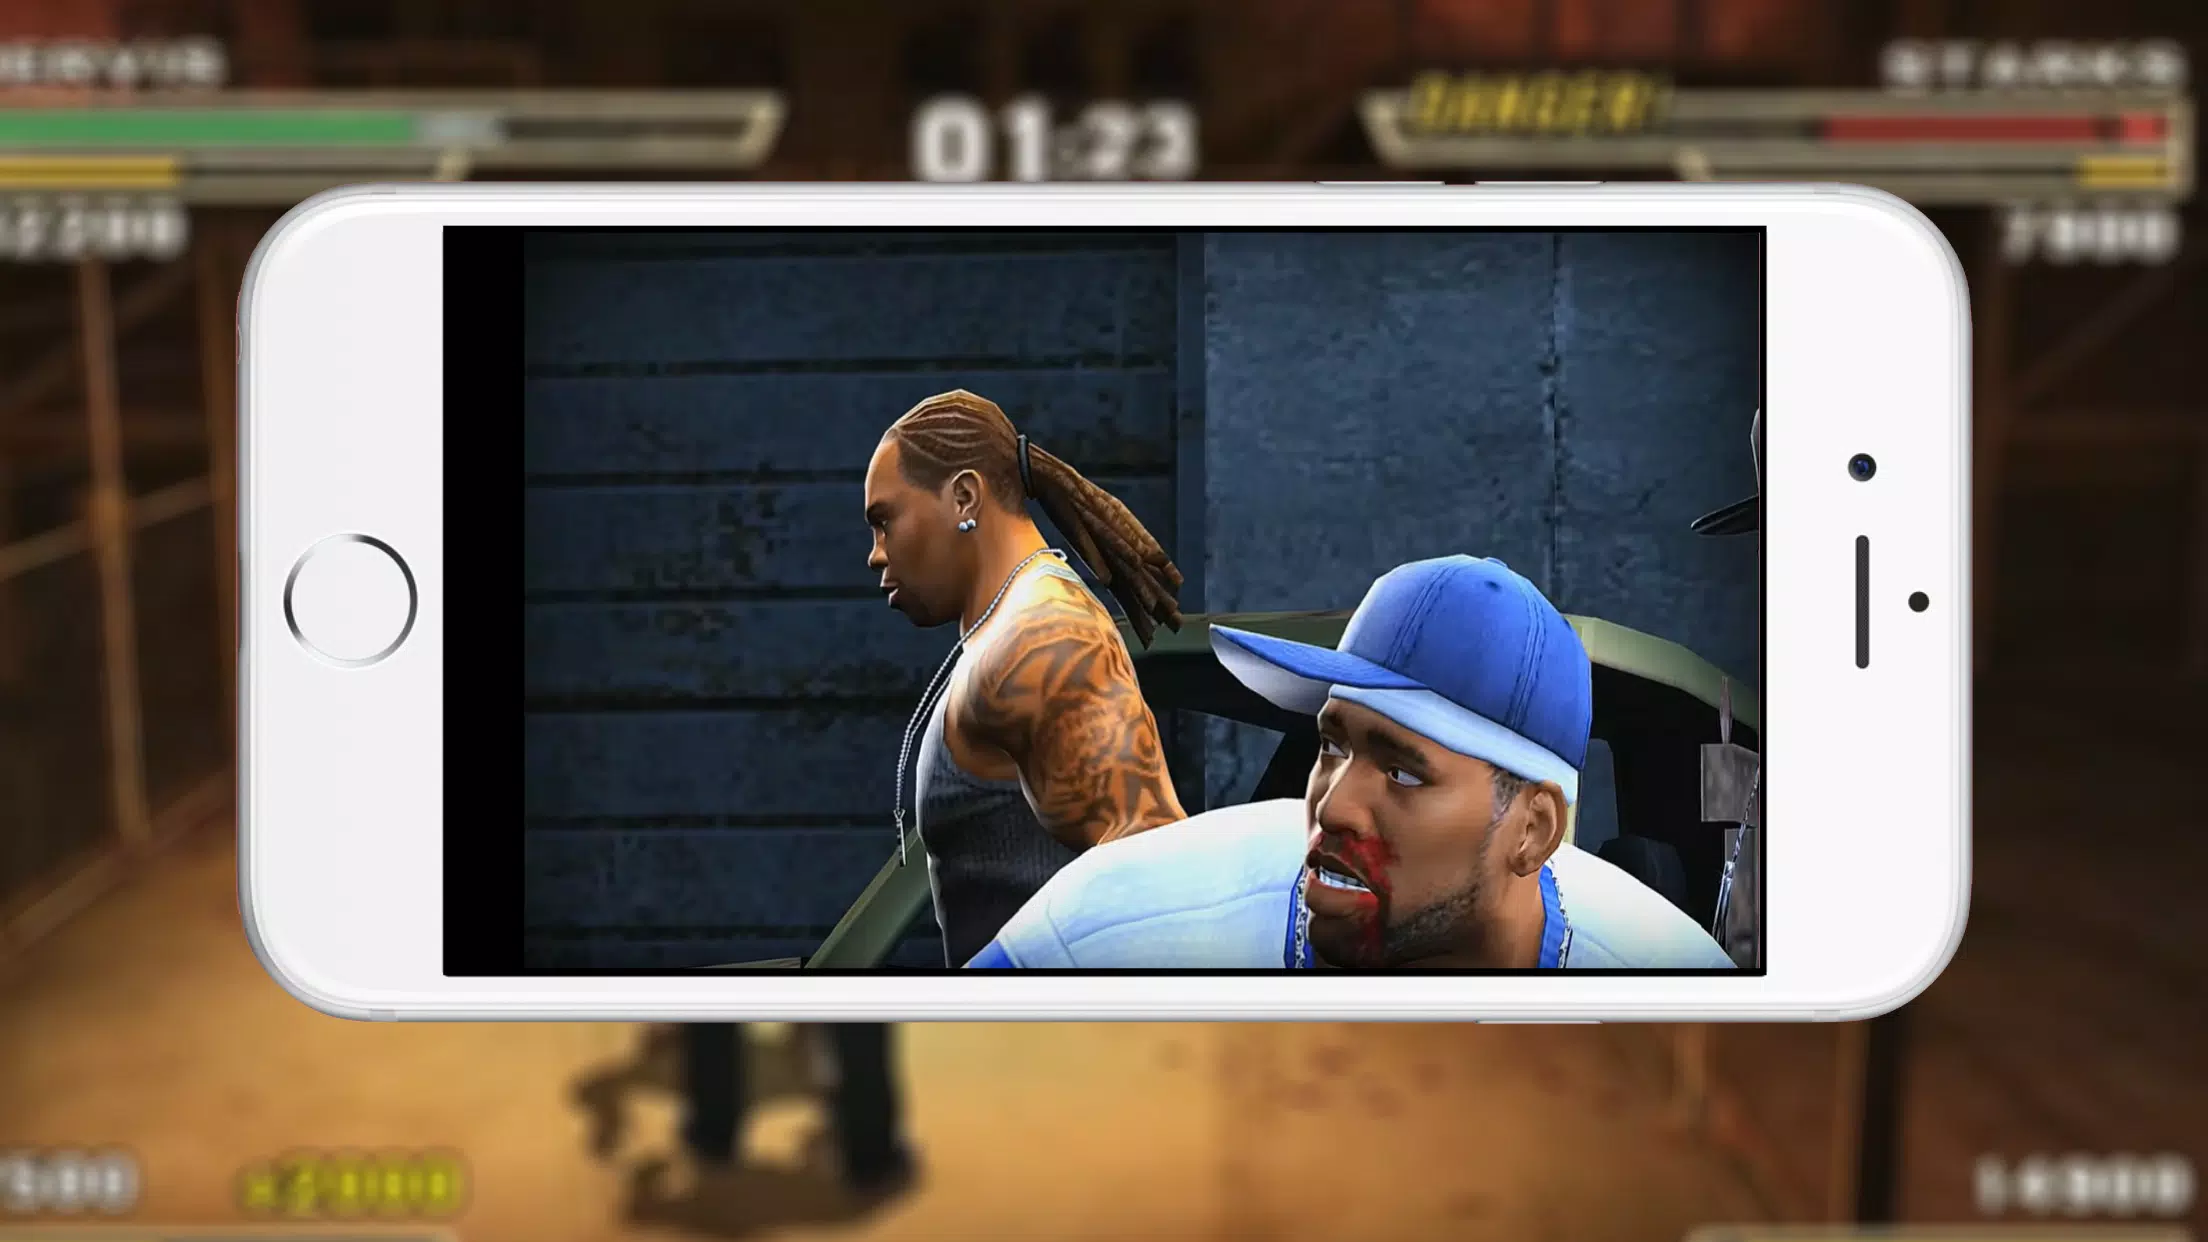 Def Jam: Fight for NY - The Takeover [PSP] Longplay 